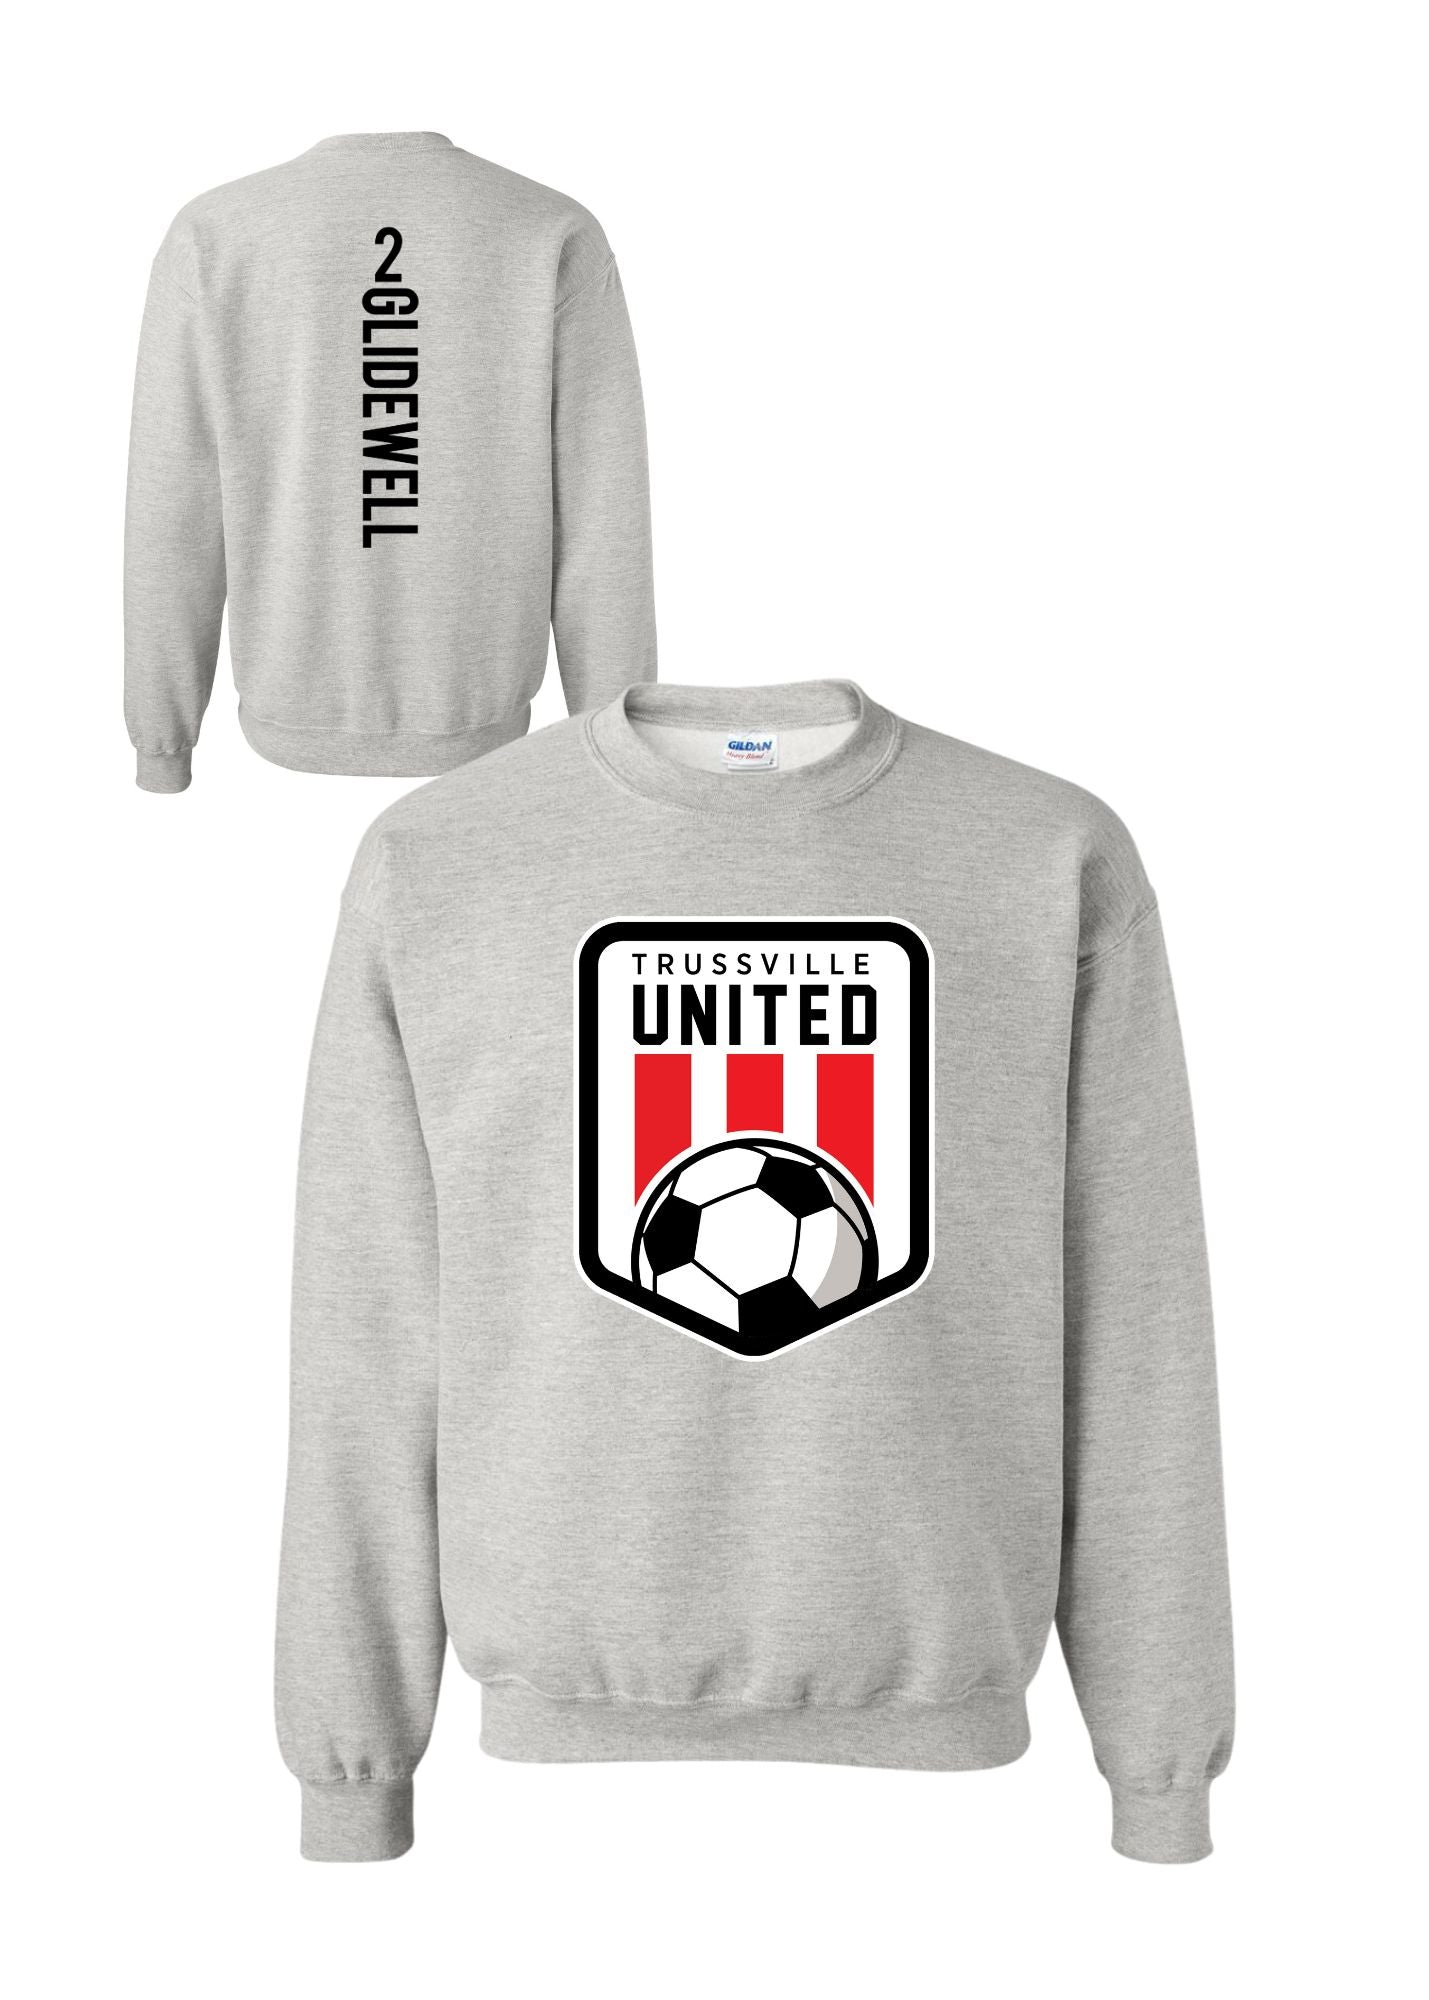 Trussville United | Customizable Adult Crewneck-Adult Crewneck-Sister Shirts-Sister Shirts, Cute & Custom Tees for Mama & Littles in Trussville, Alabama.